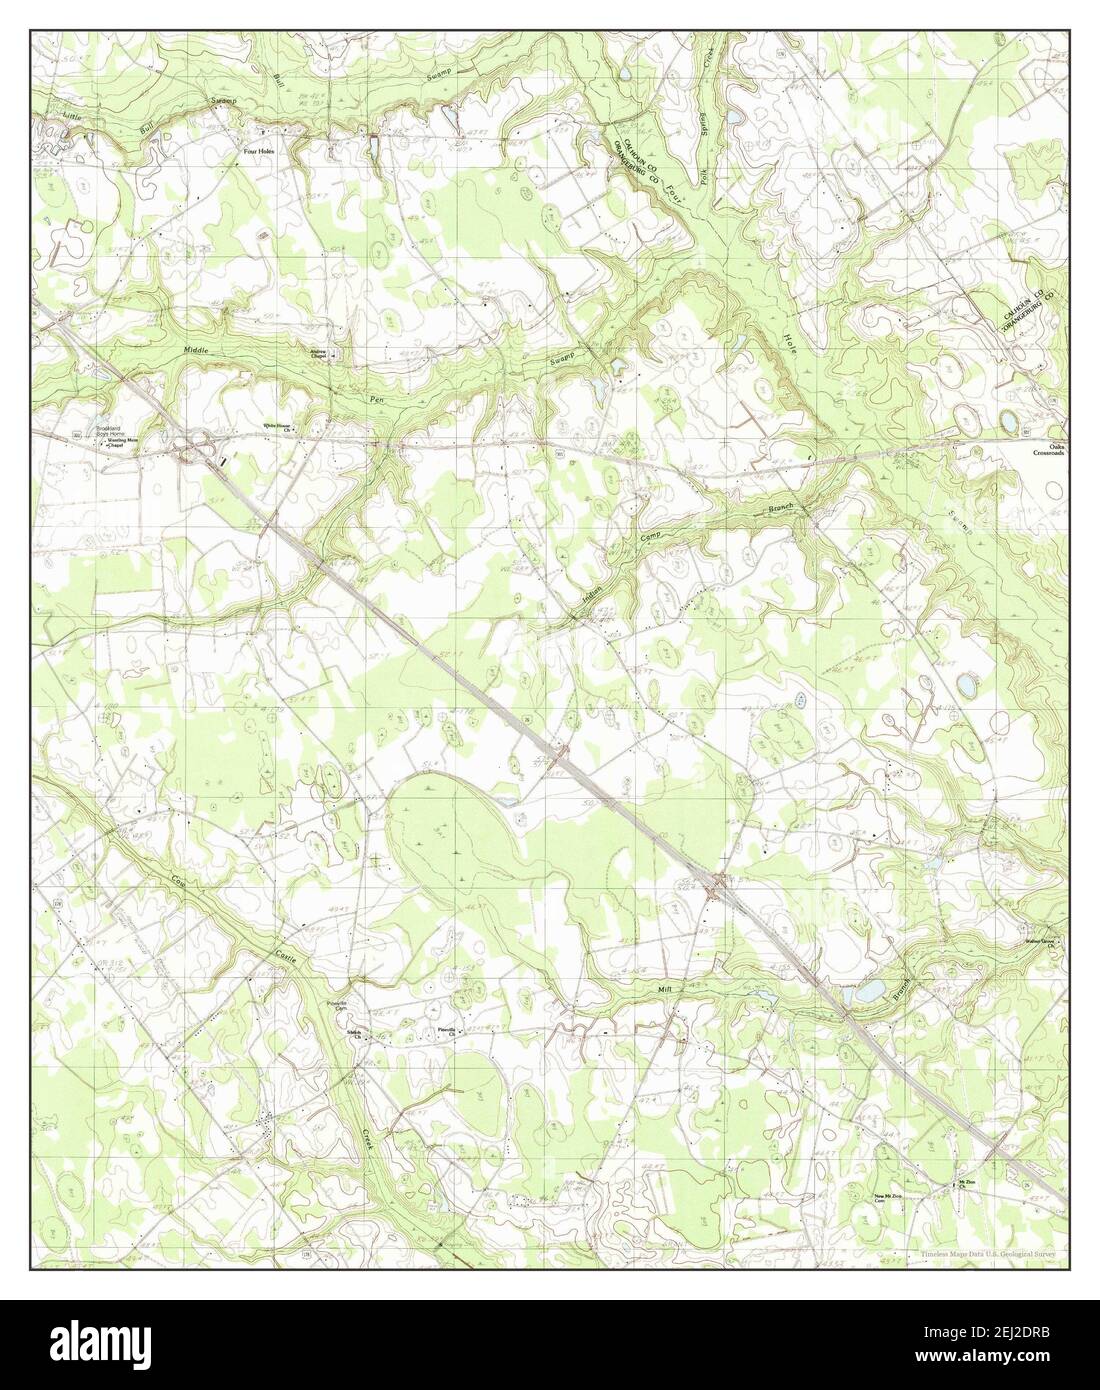 Indian Camp Branch, South Carolina, map 1982, 1:24000, United States of America by Timeless Maps, data U.S. Geological Survey Stock Photo